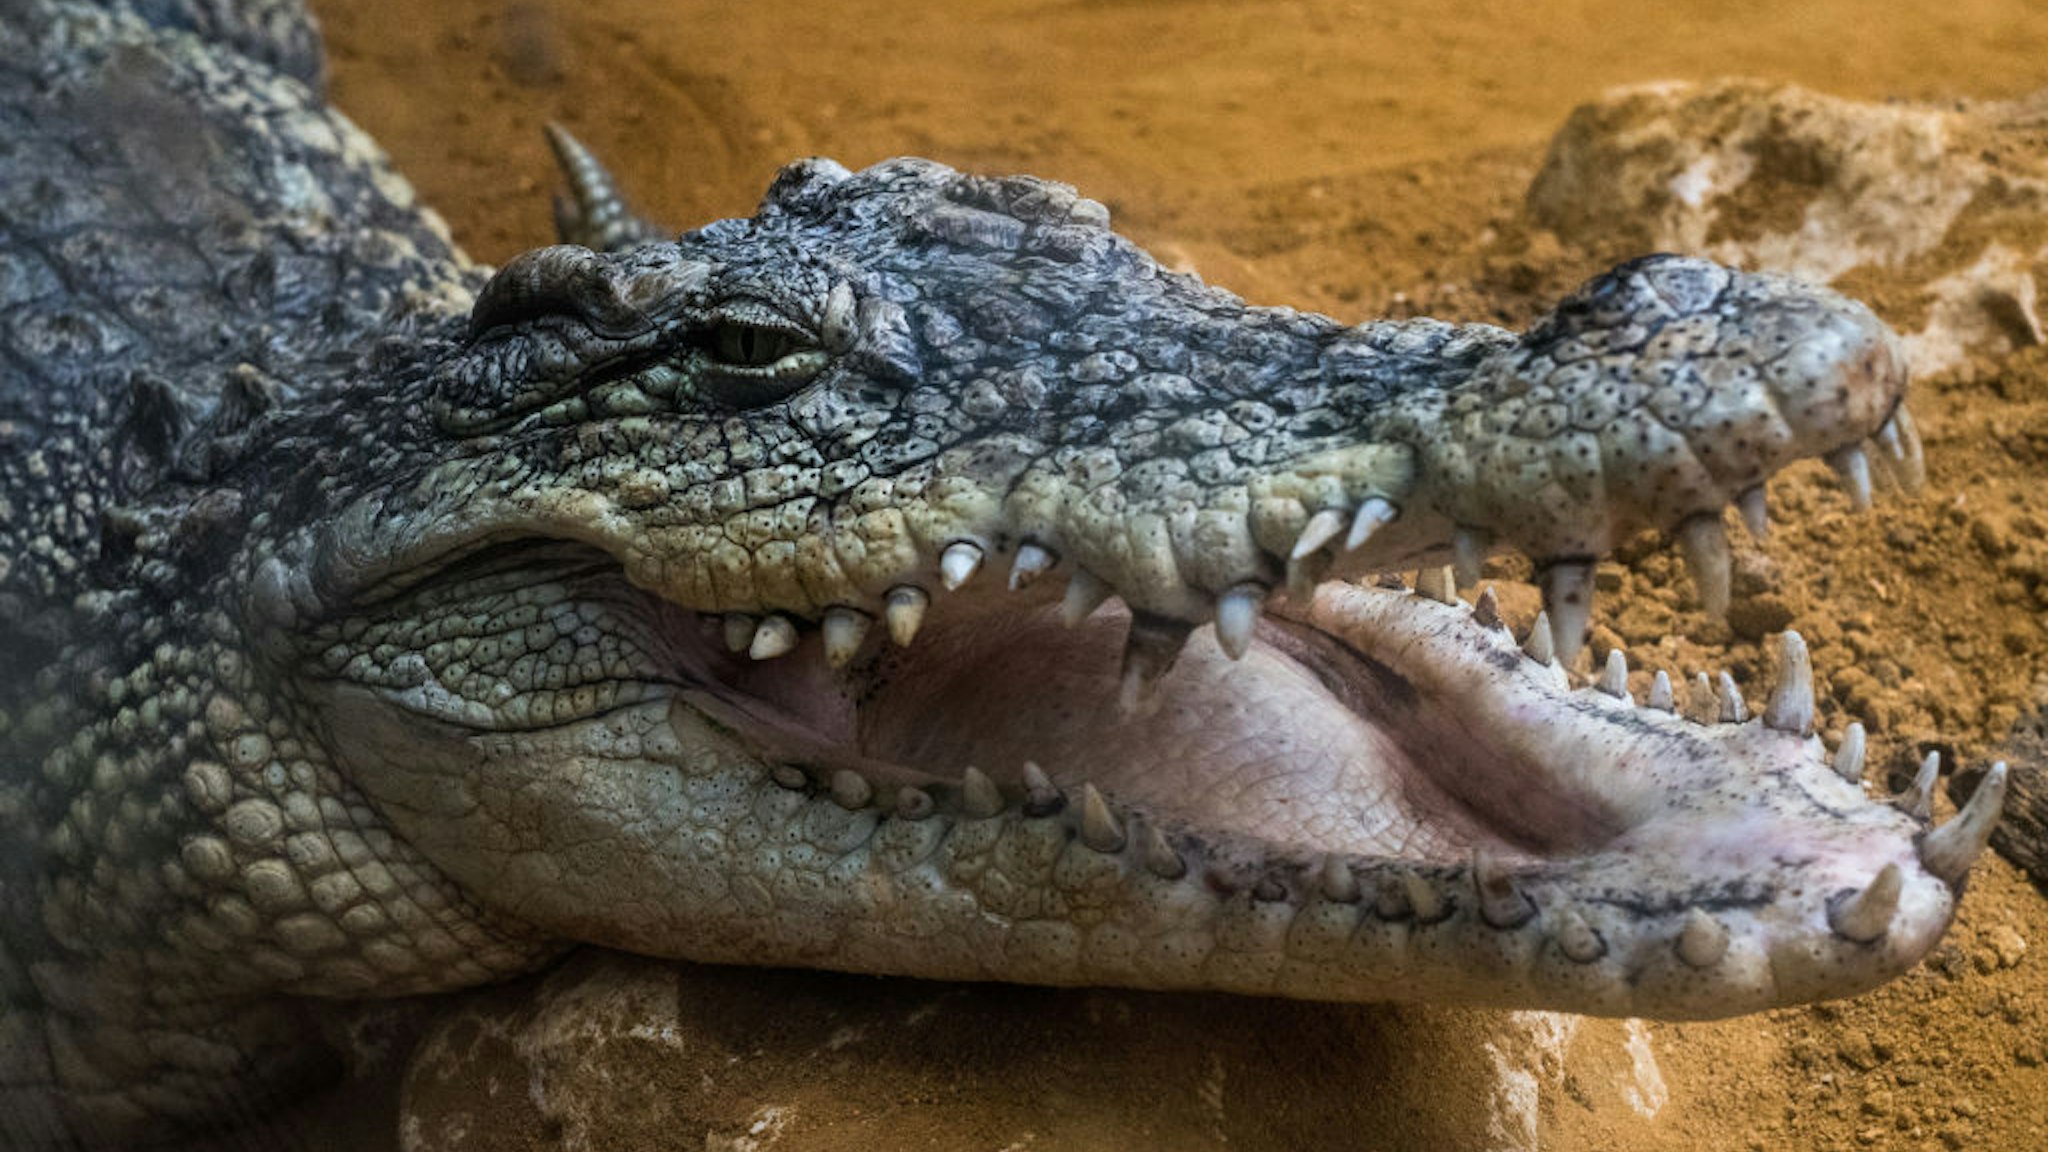 A Nile crocodile (Crocodylus niloticus) with its mouth opened pictured in its enclosure at Faunia zoo park during the first day of a heat wave.